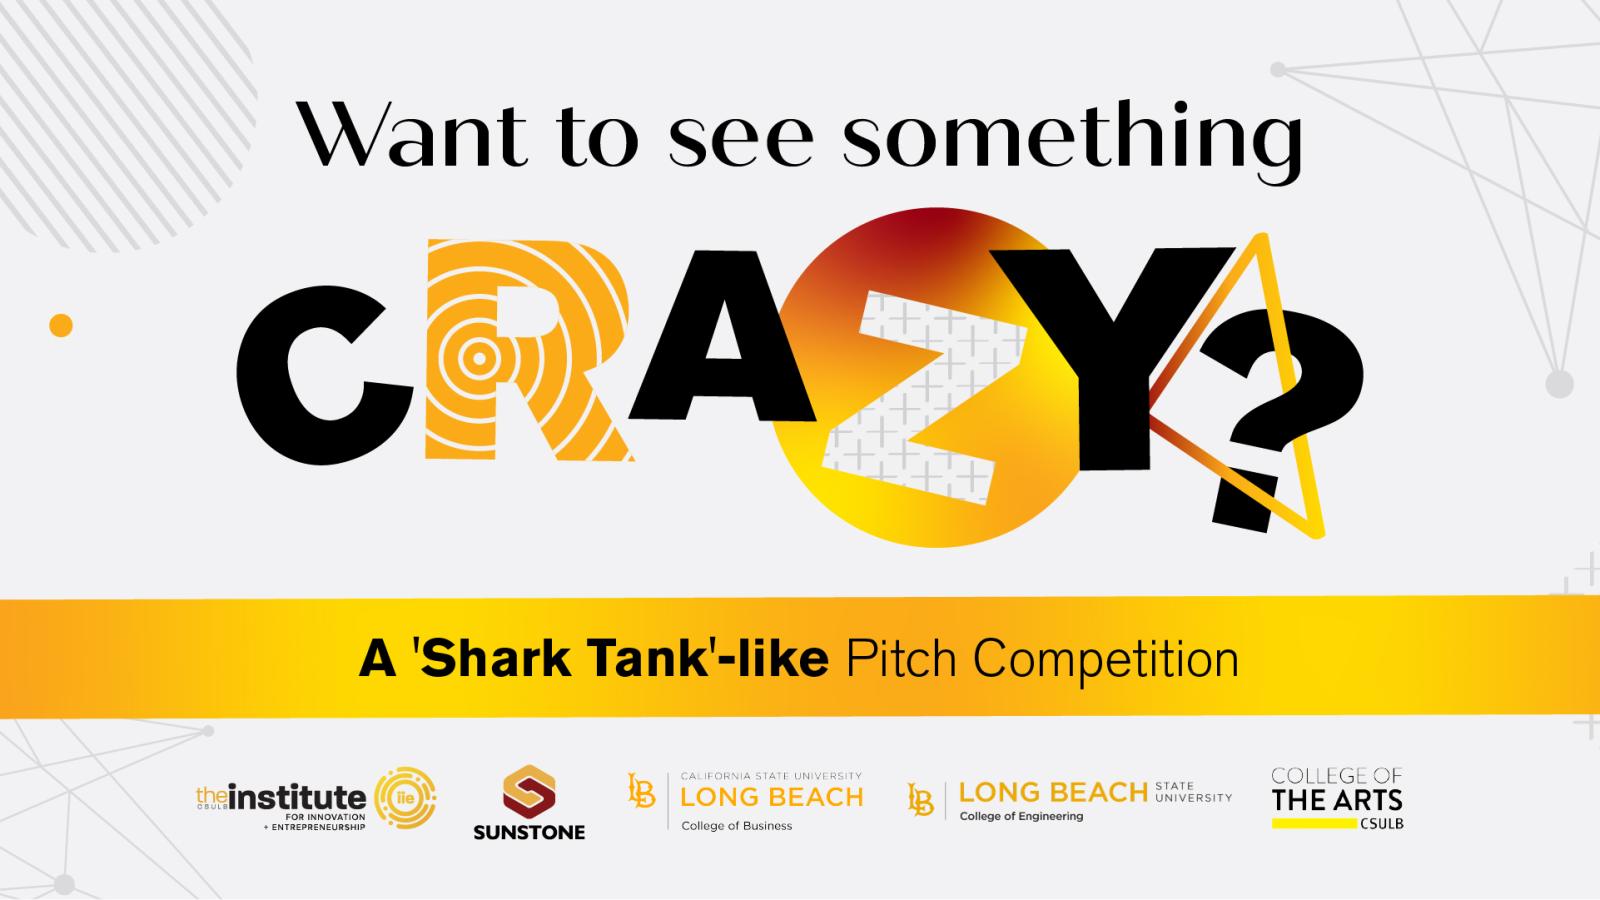 Want to see something crazy? A "Shark Tank"-like Pitch Competition with various CSULB logos